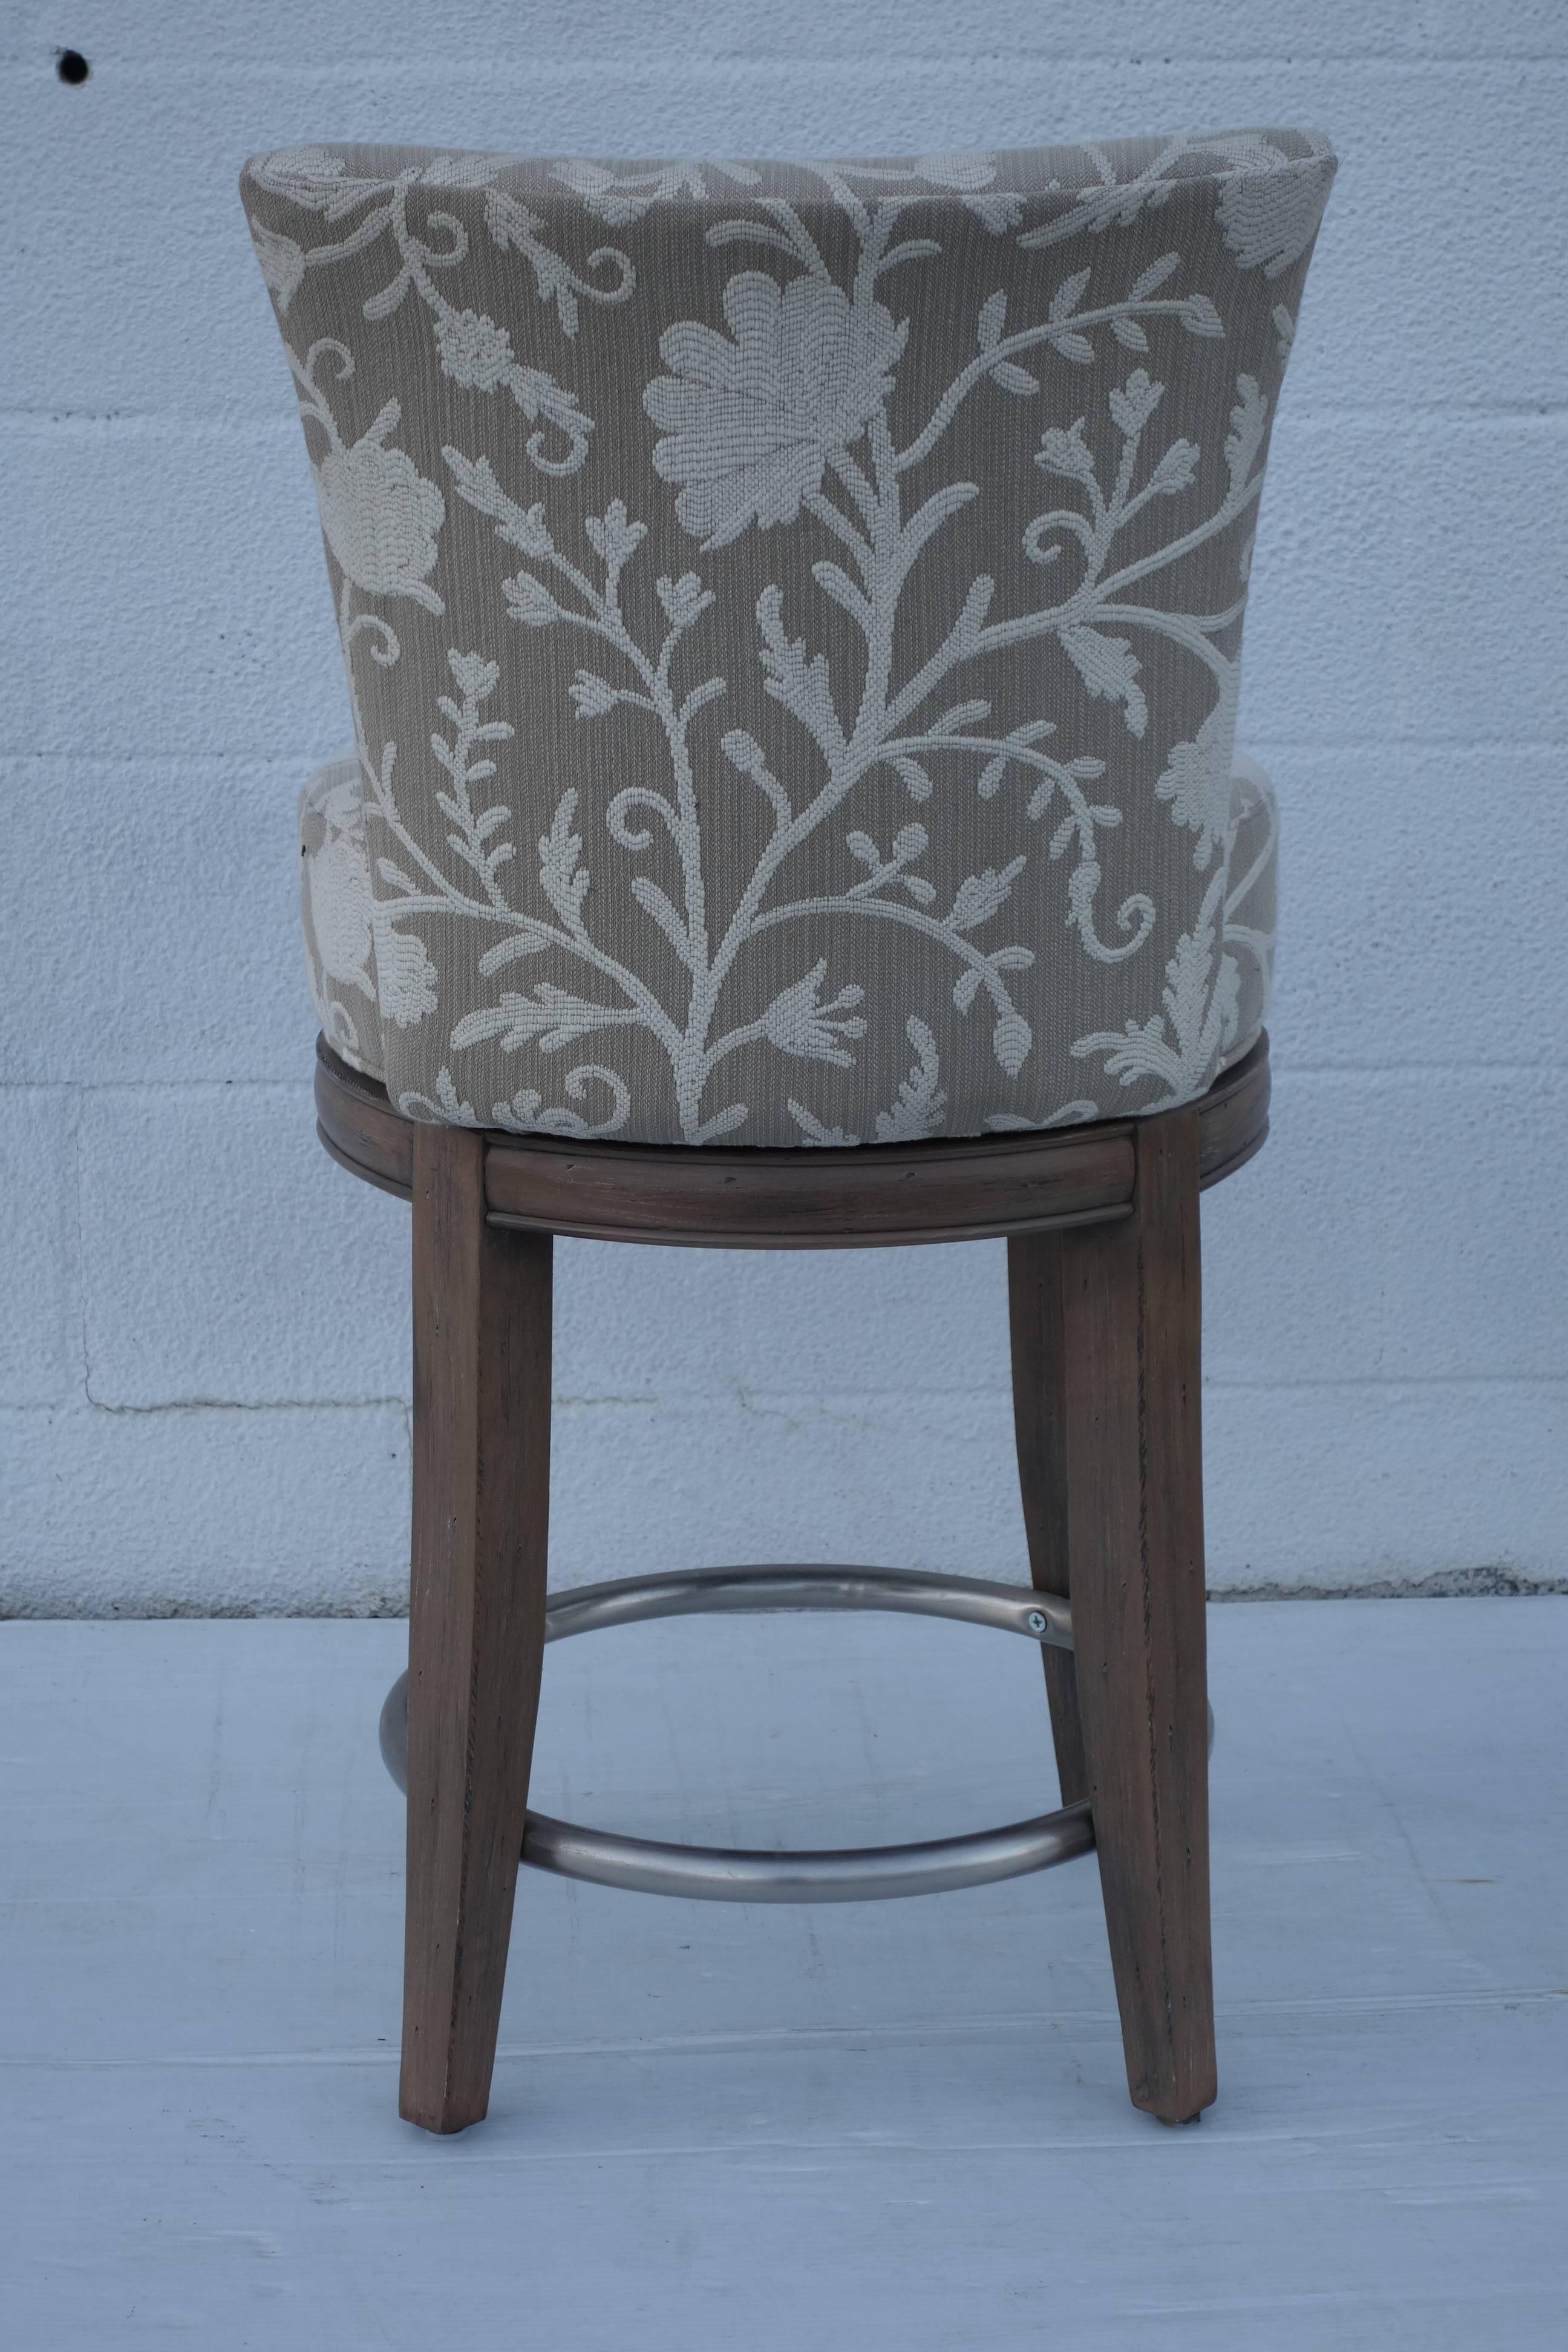 Danbury counter stool with a swivel seat. 

The seat height is 26